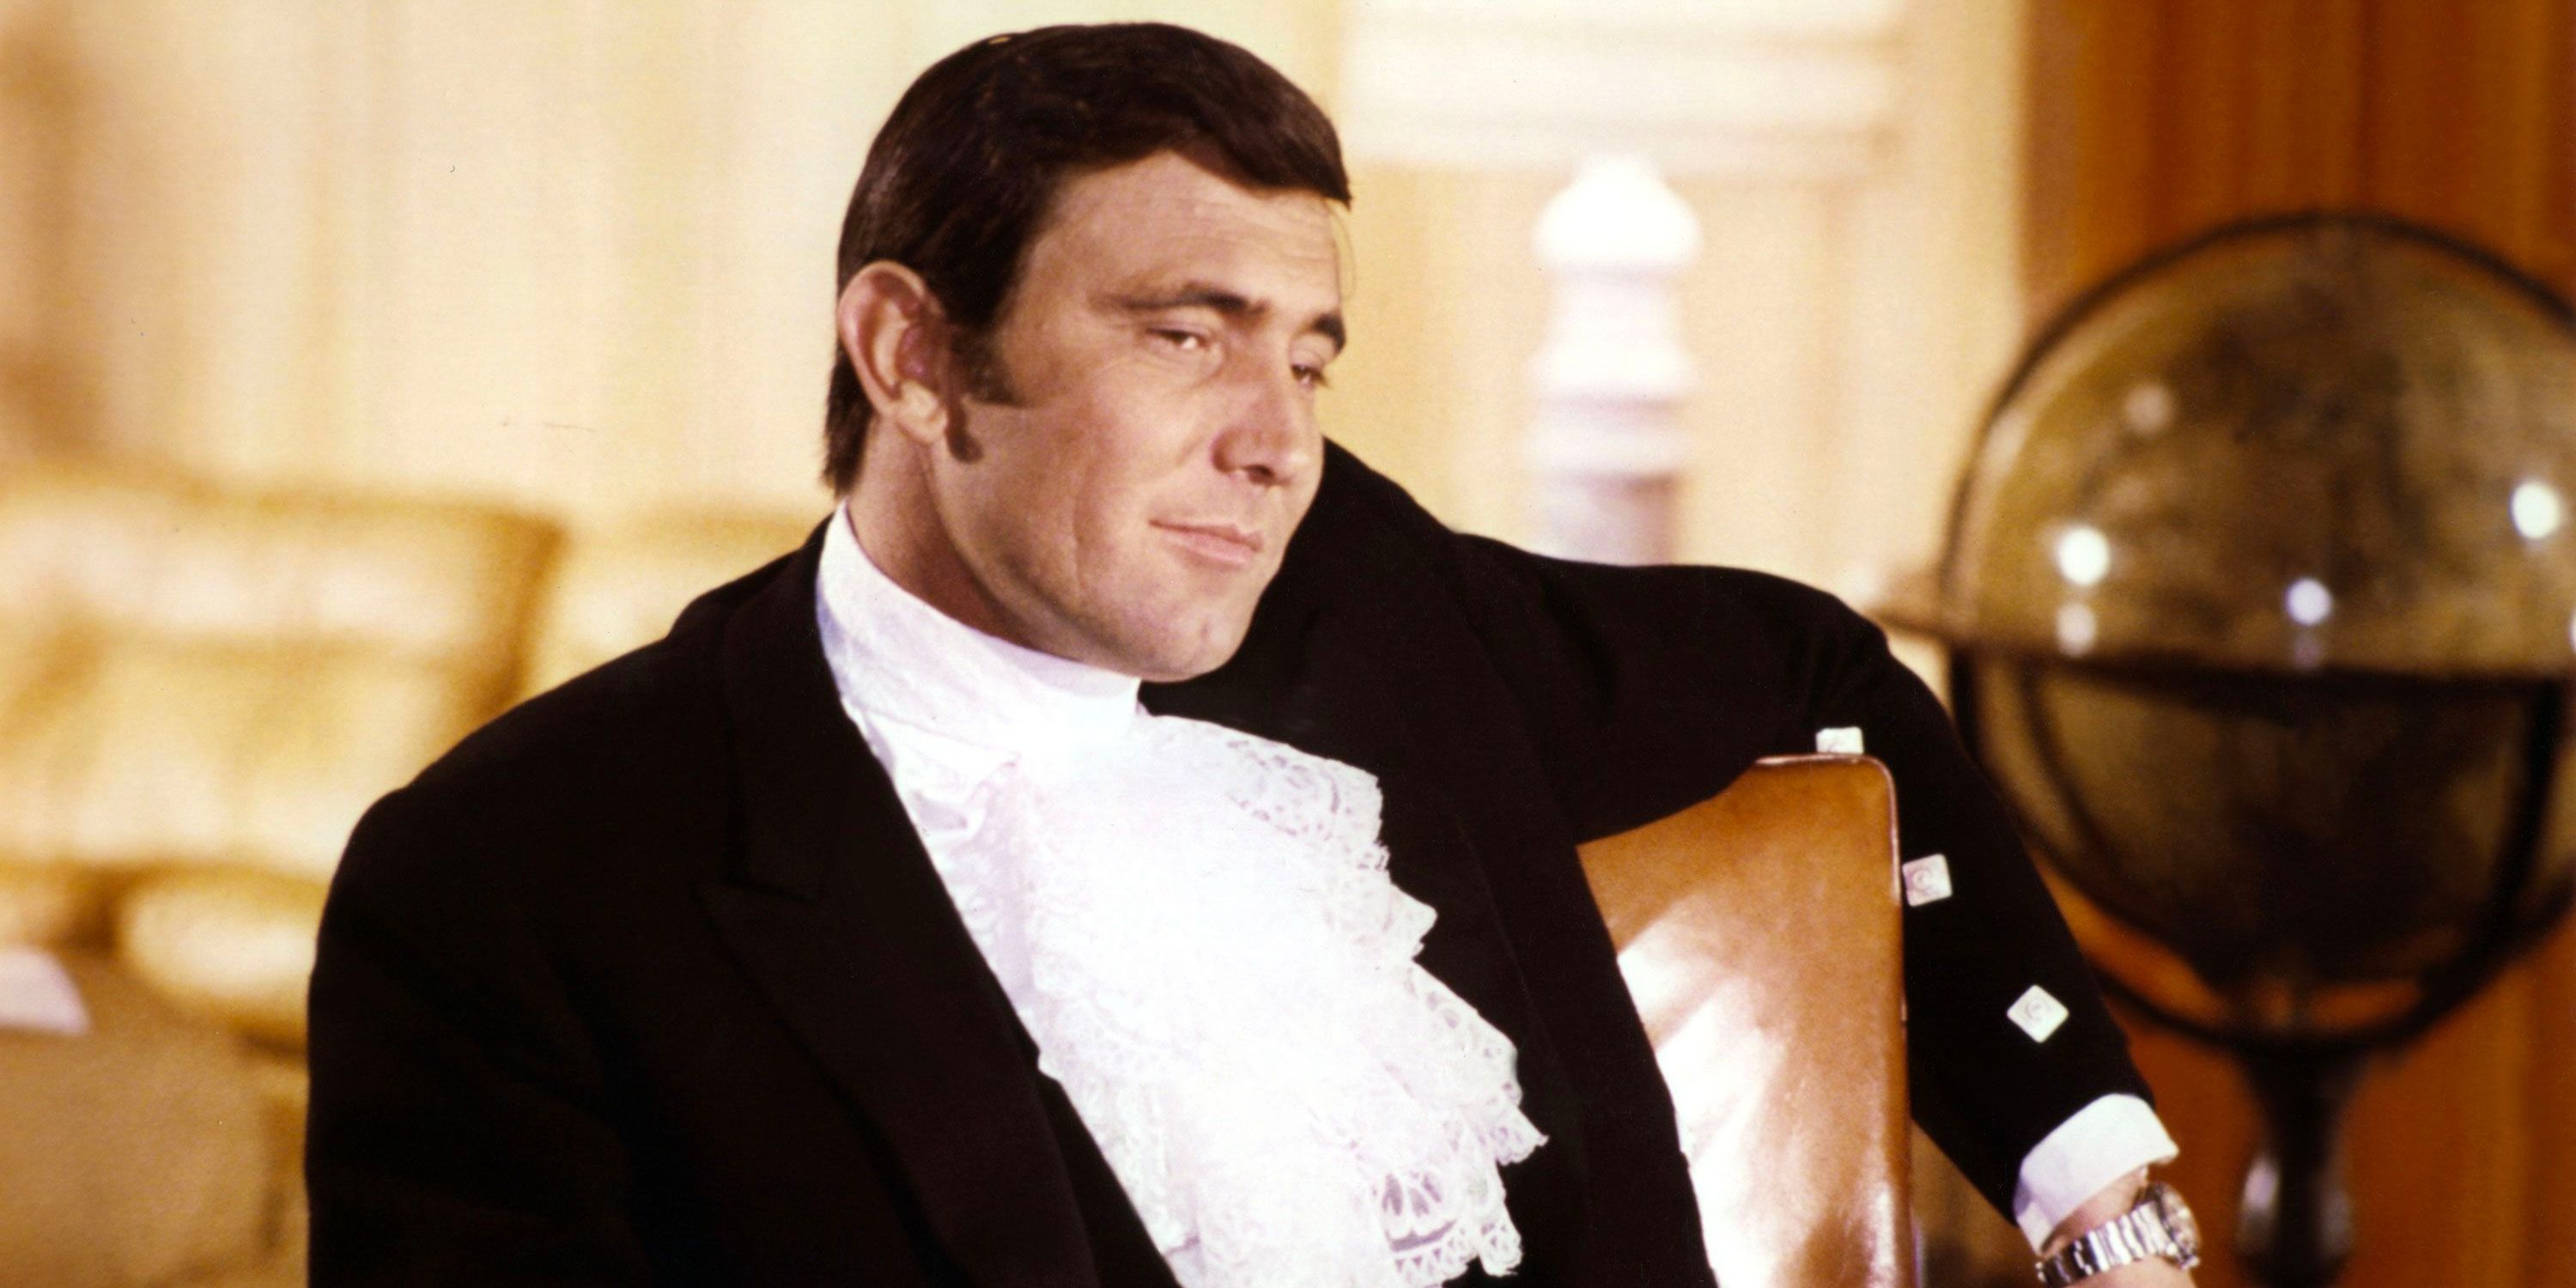 James Bond (George Lazenby) leans back in a chair while wearing a fancy suit. 